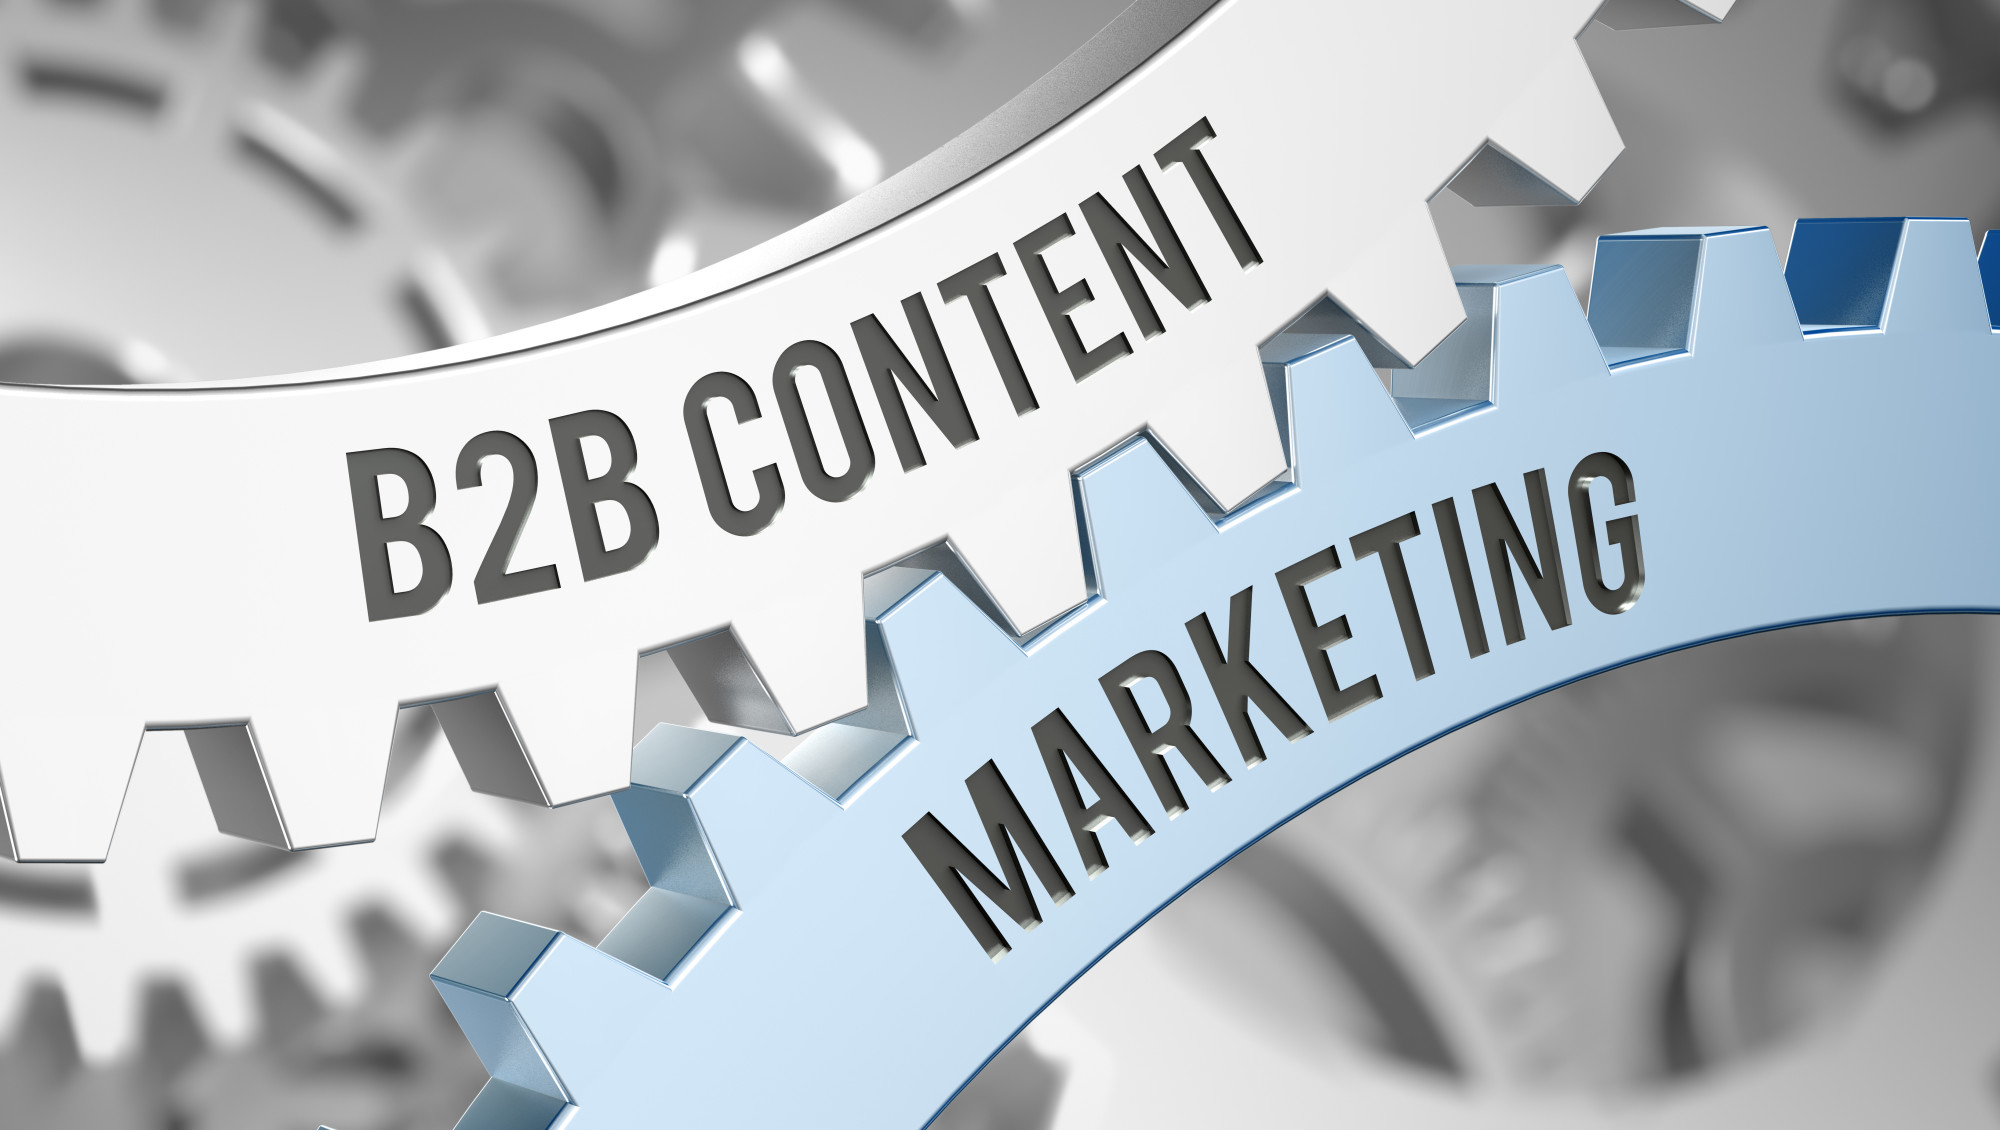 7 B2B Marketing Mistakes You're Likely Making Right Now